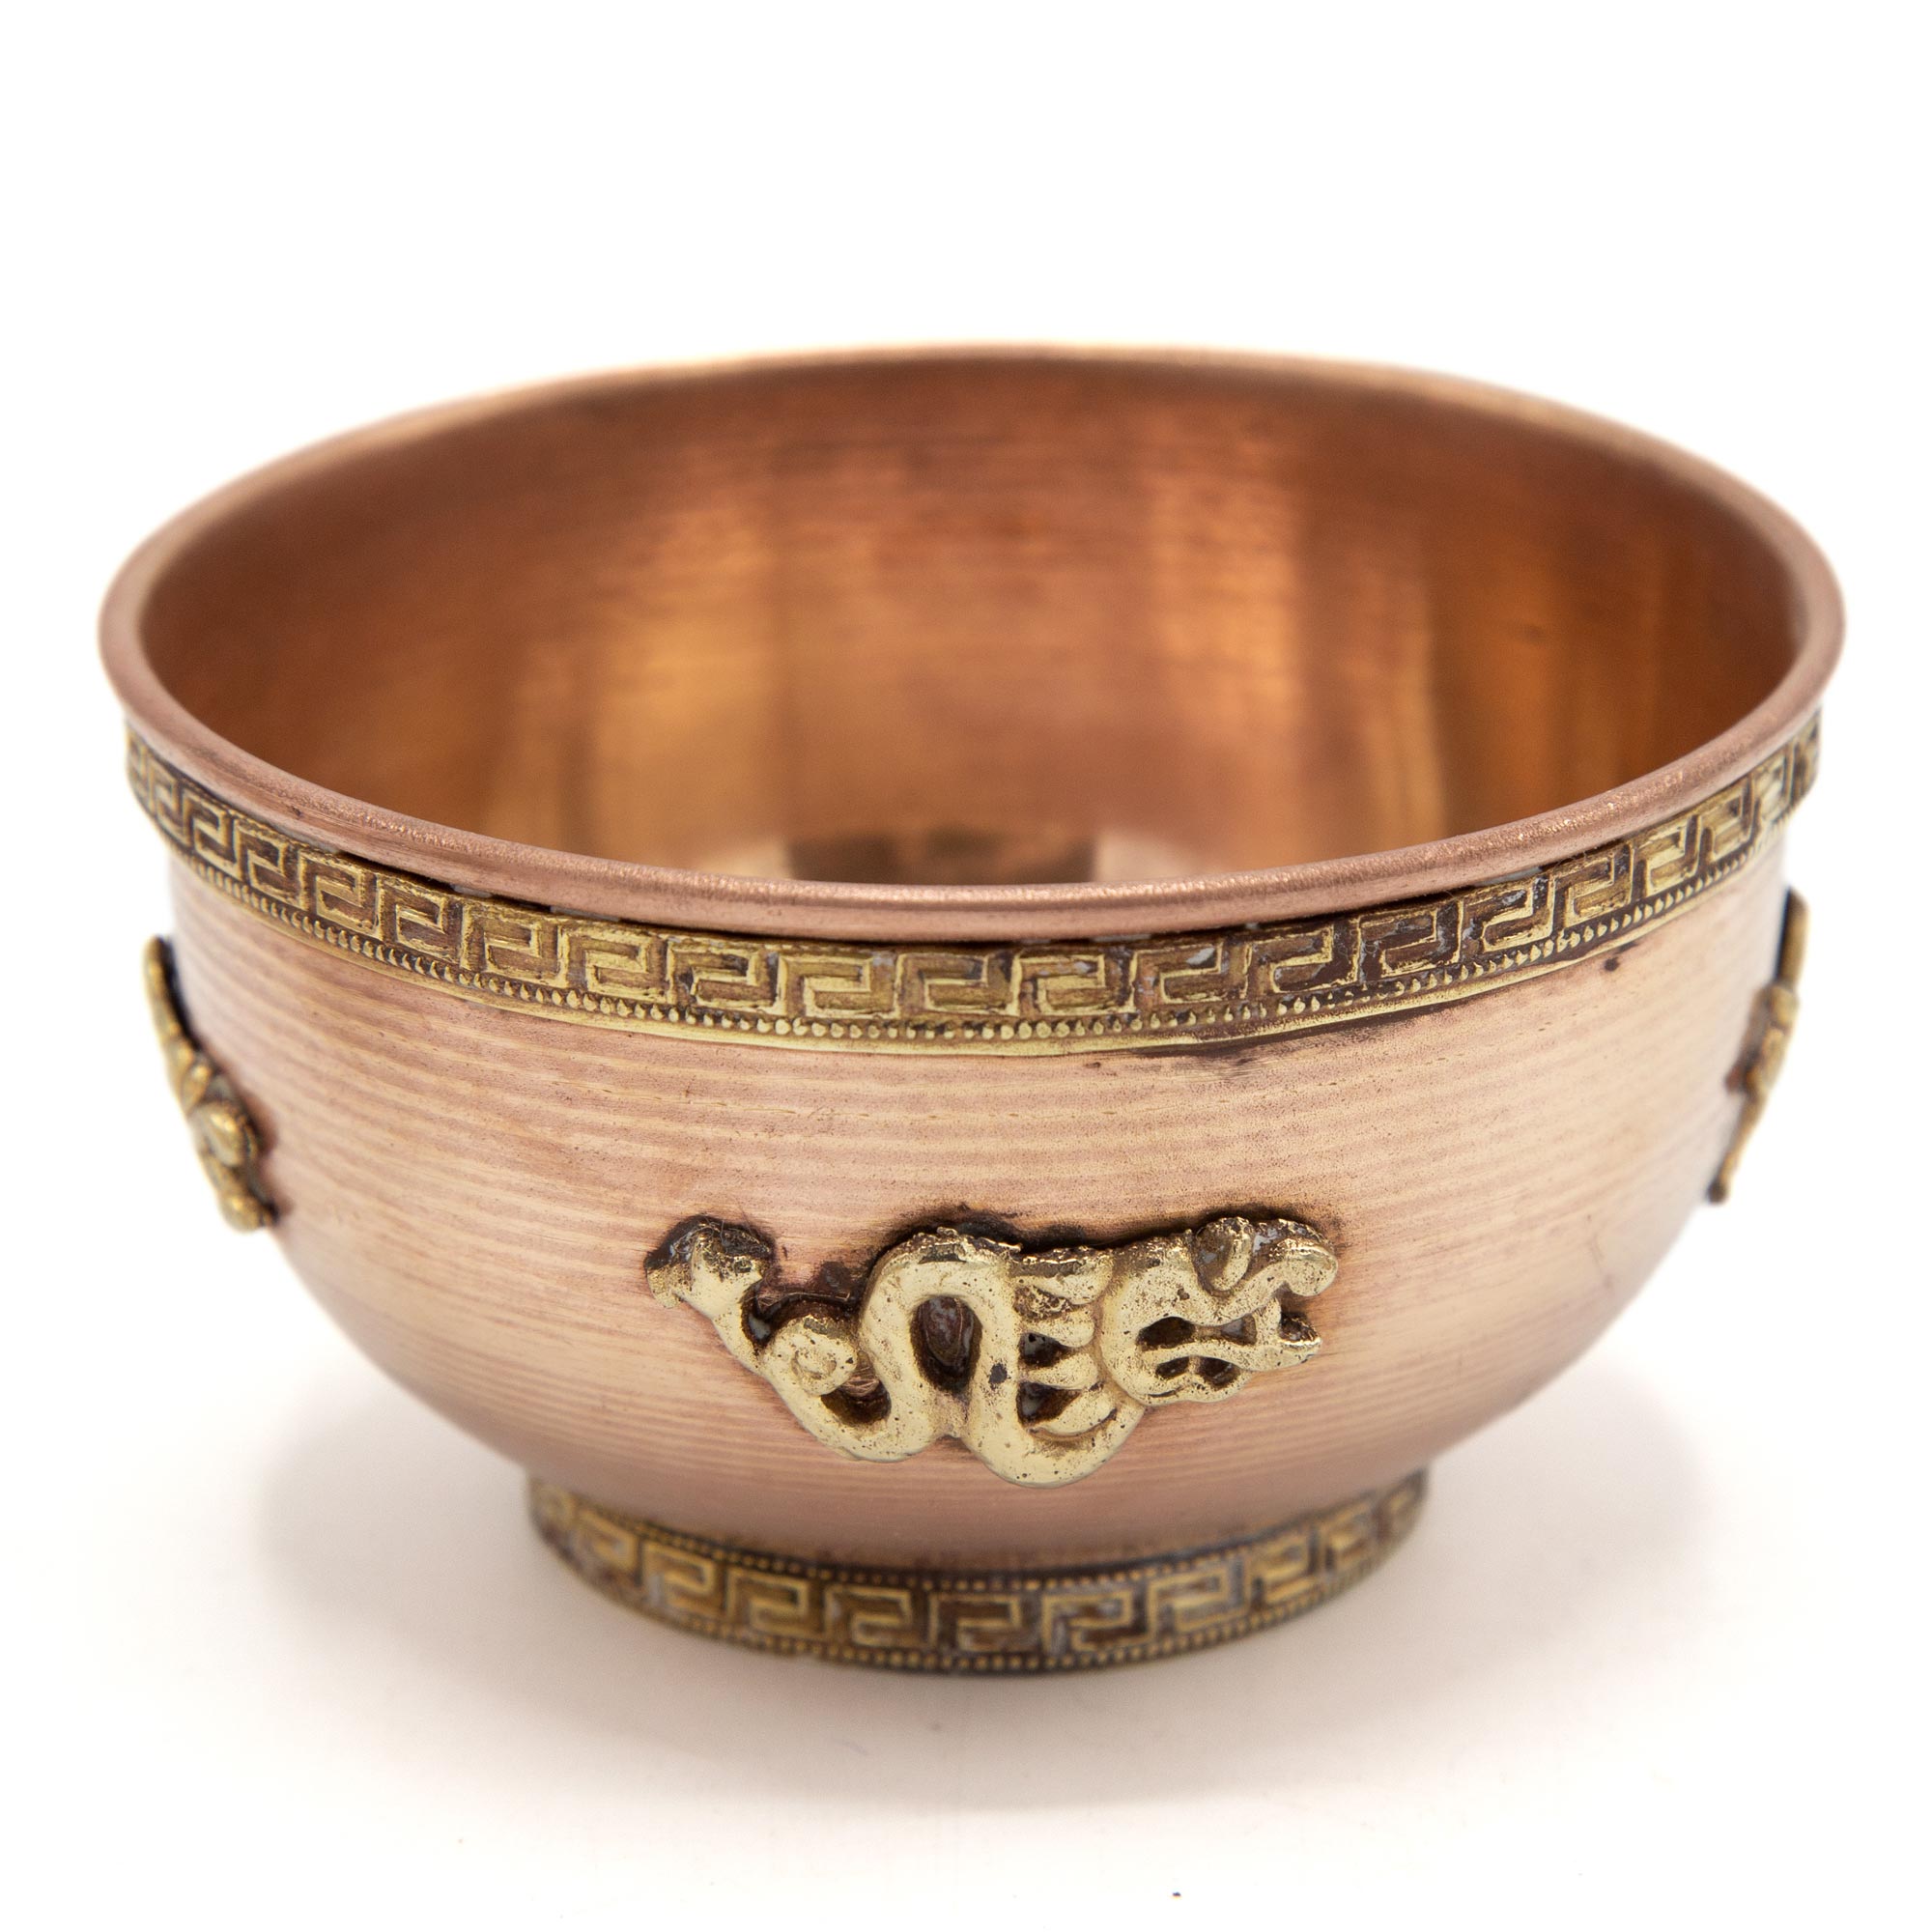 Copper and Brass Dragon Offering Bowls - 4.25